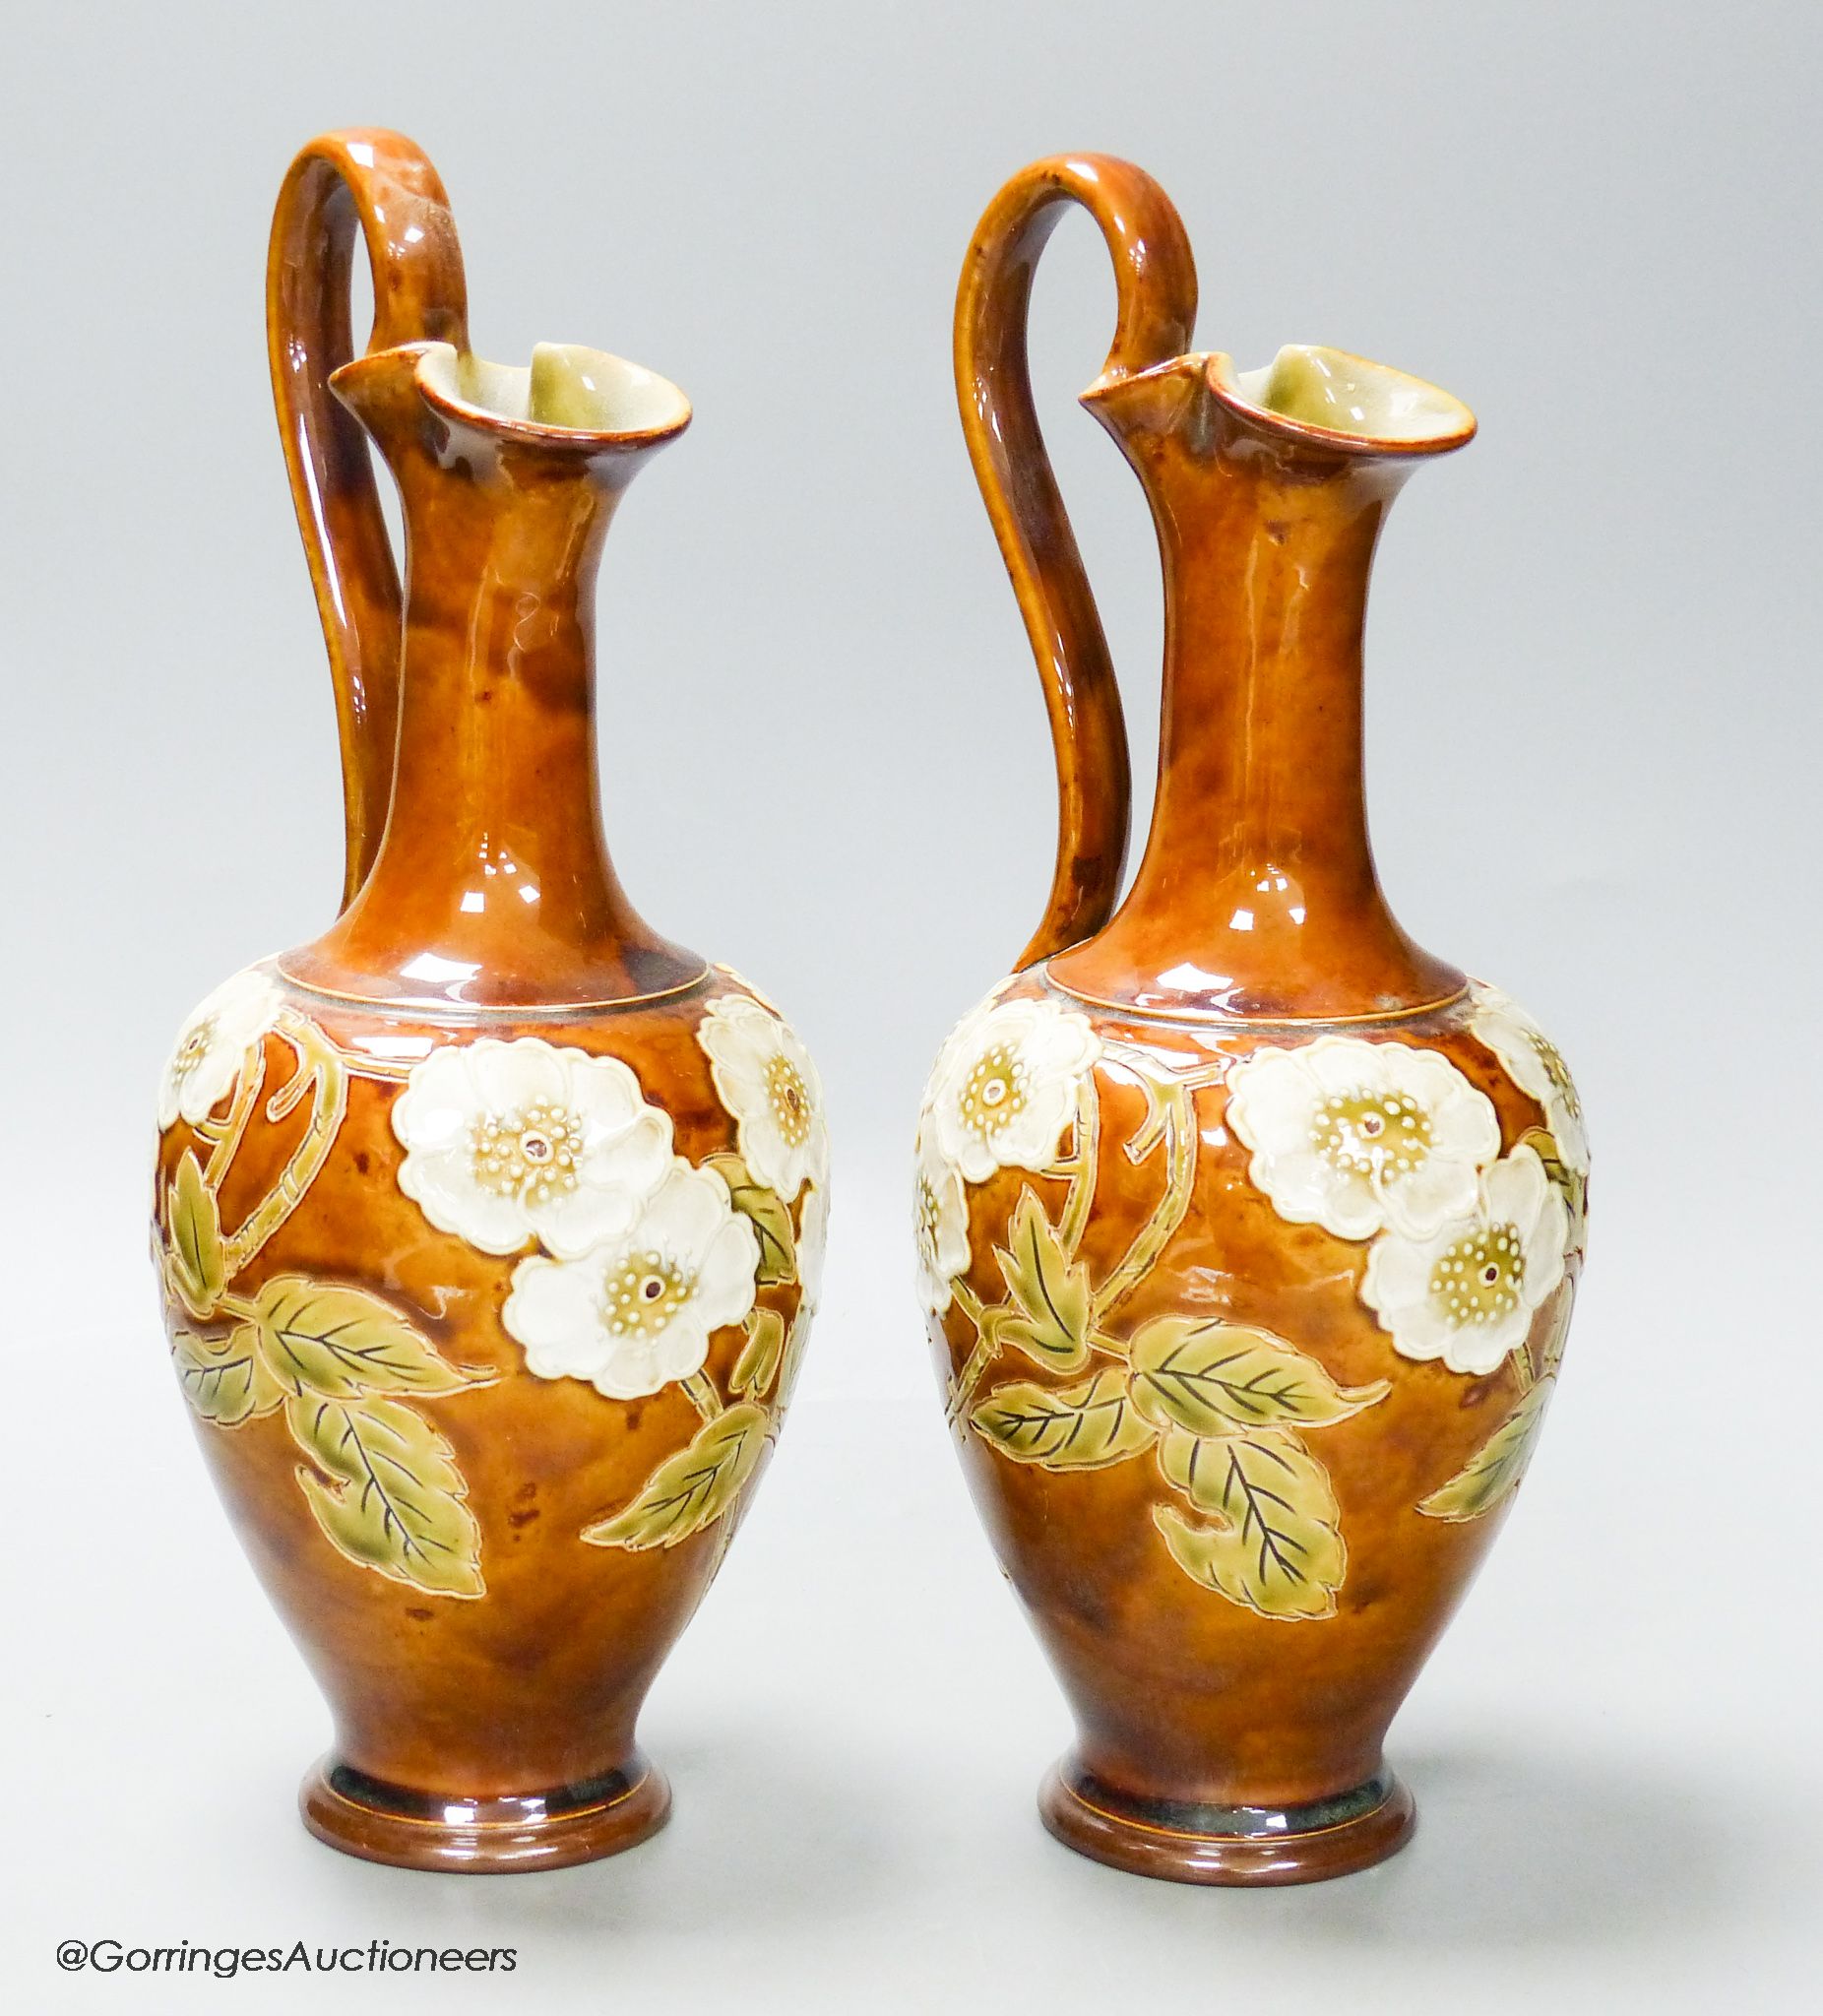 A pair of Royal Doulton stoneware ewers, height 30cm